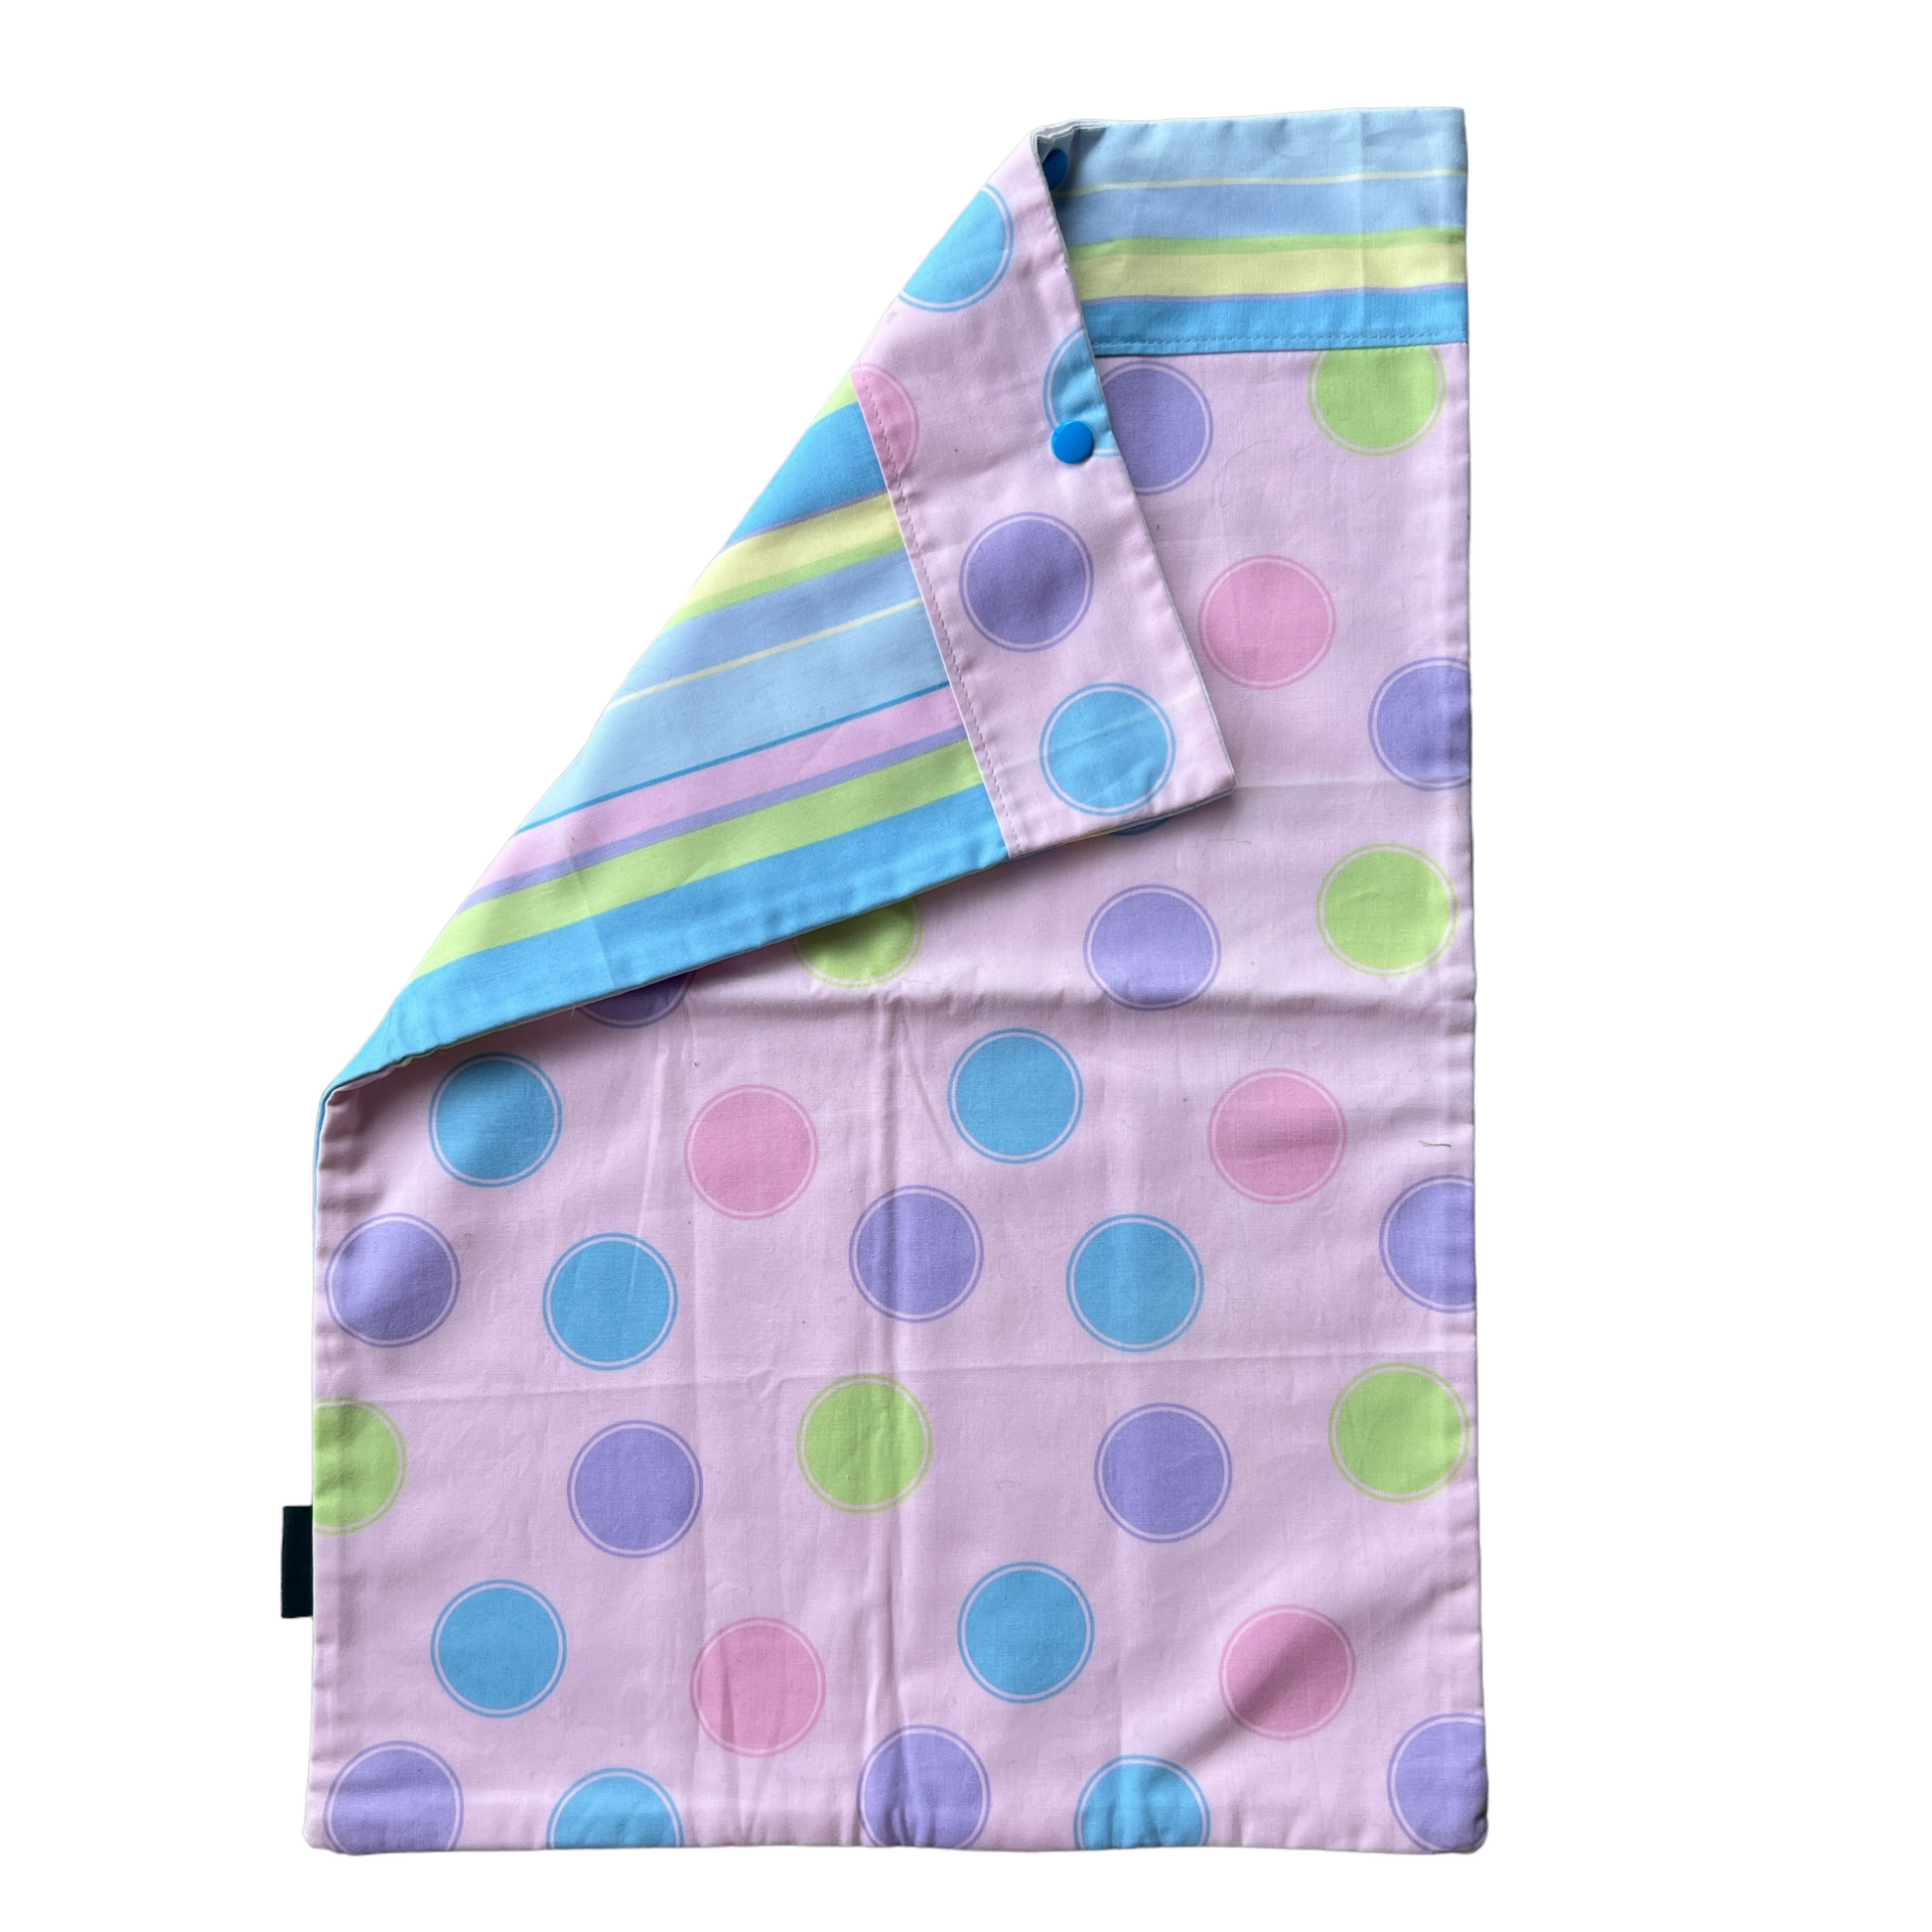 Reusable Cotton Nappy Bags  Splash Quilting Polka dots and Stripes  